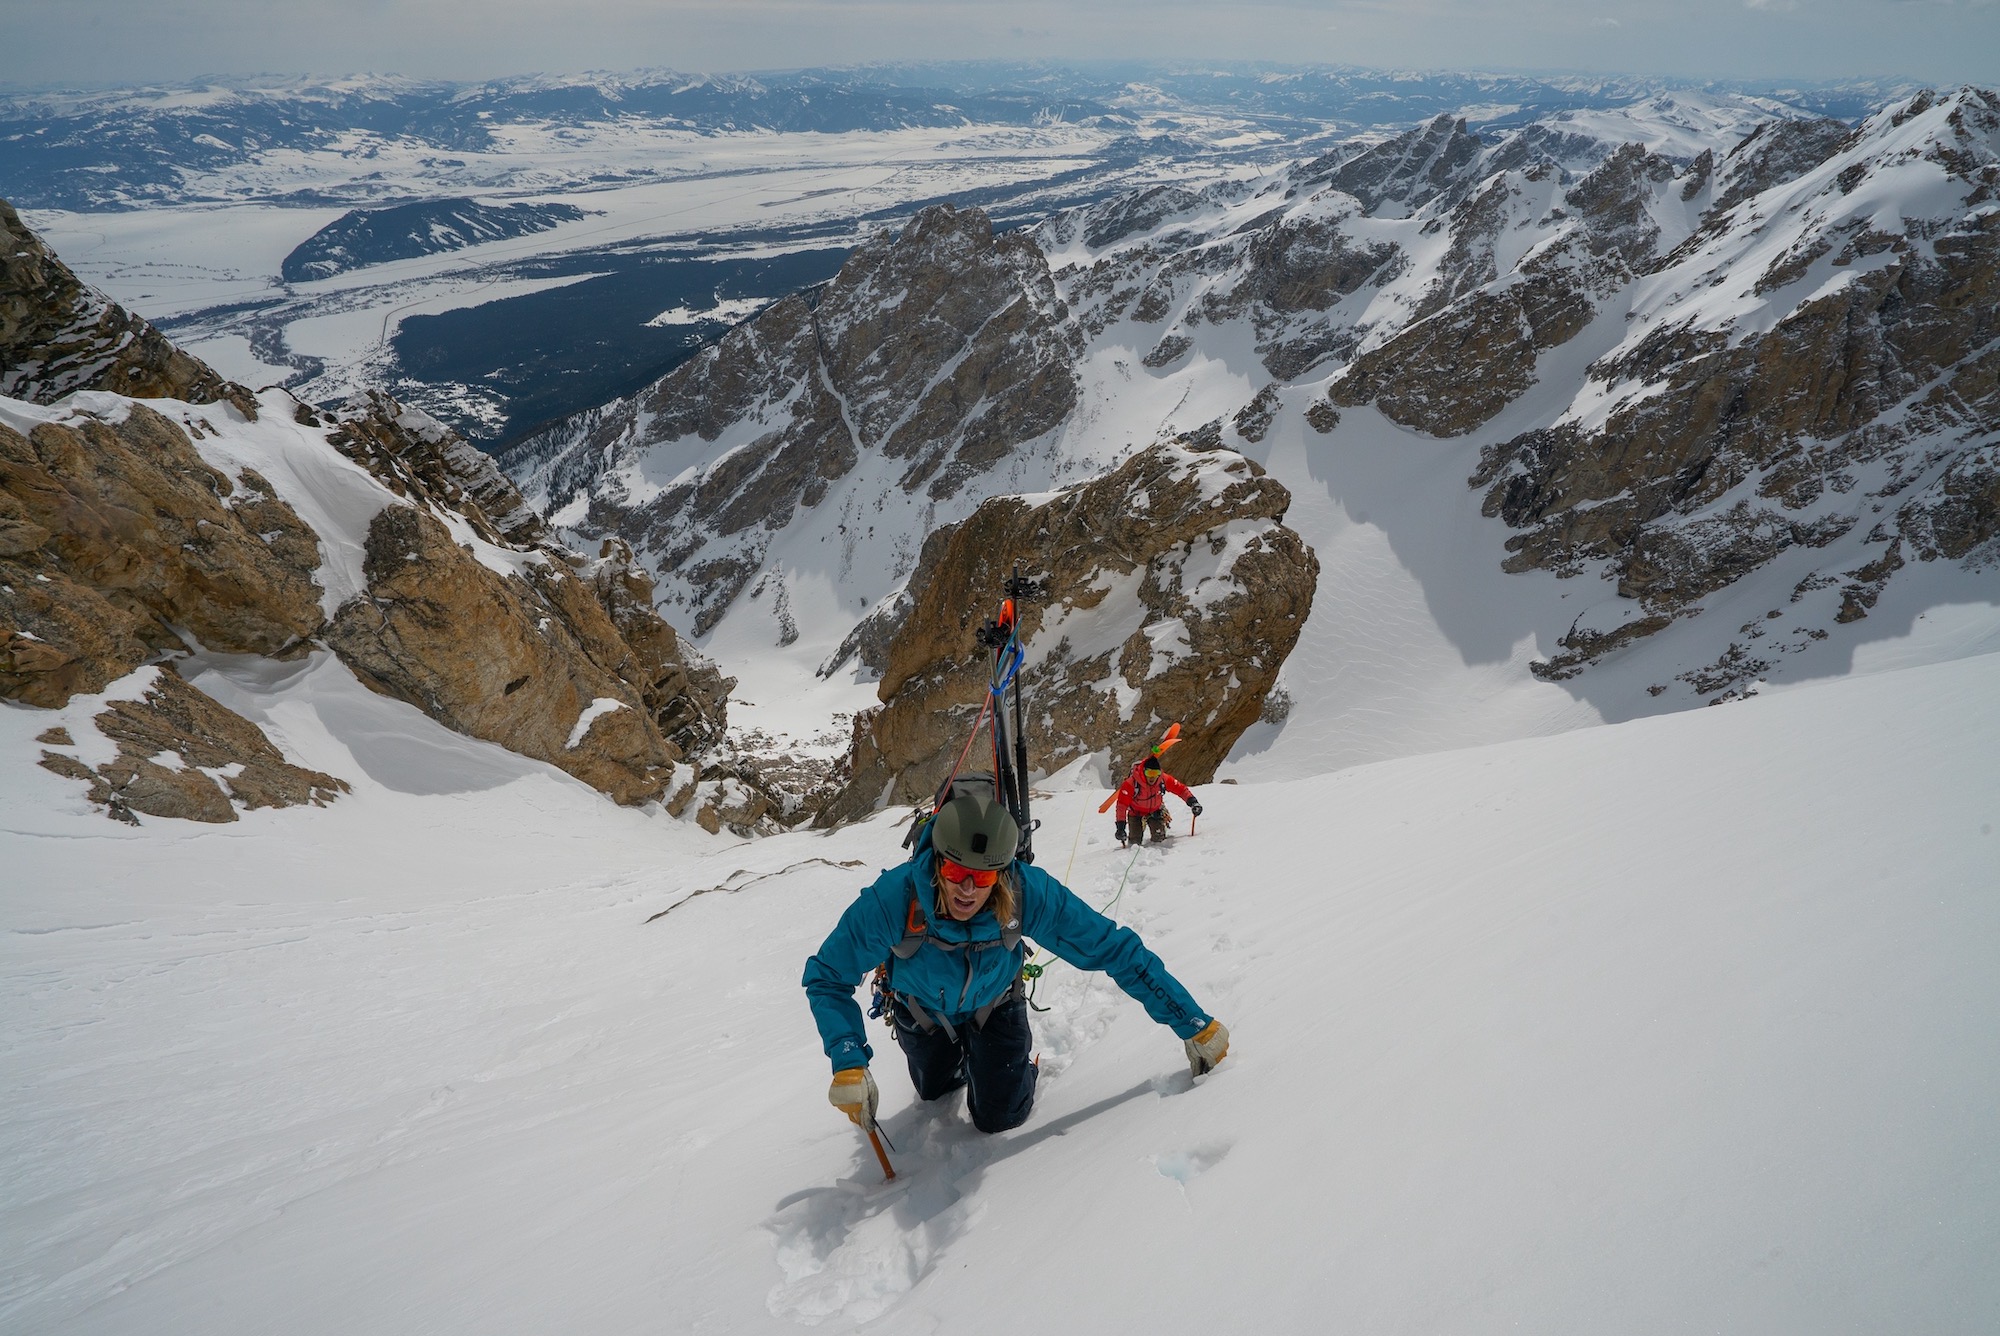 RunOut #85: WTF is “Ski Mountaineering” with Cody Townsend?